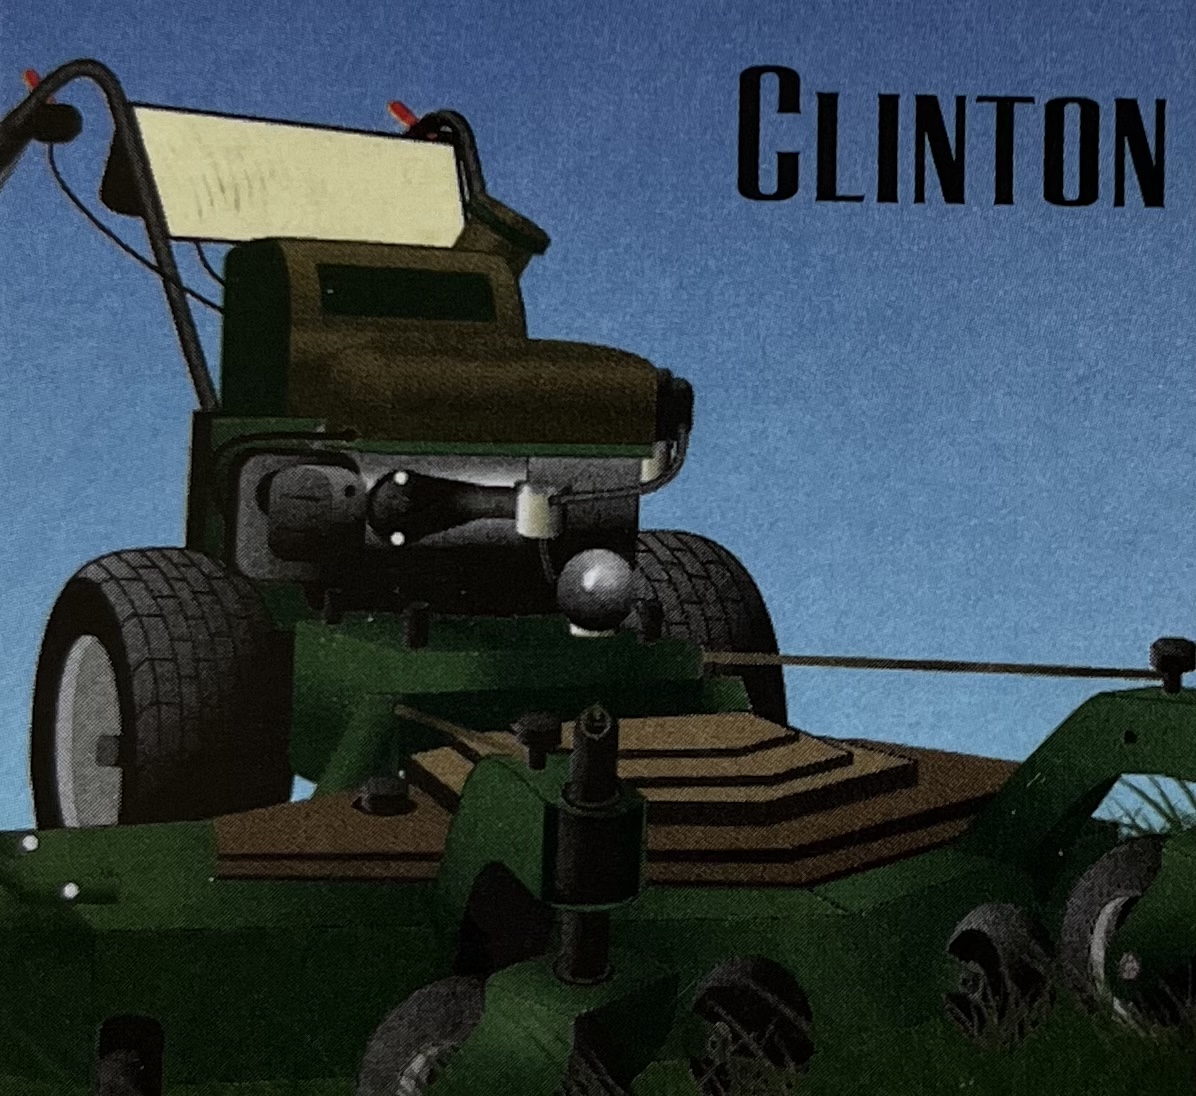 Clinton Lawn and Power